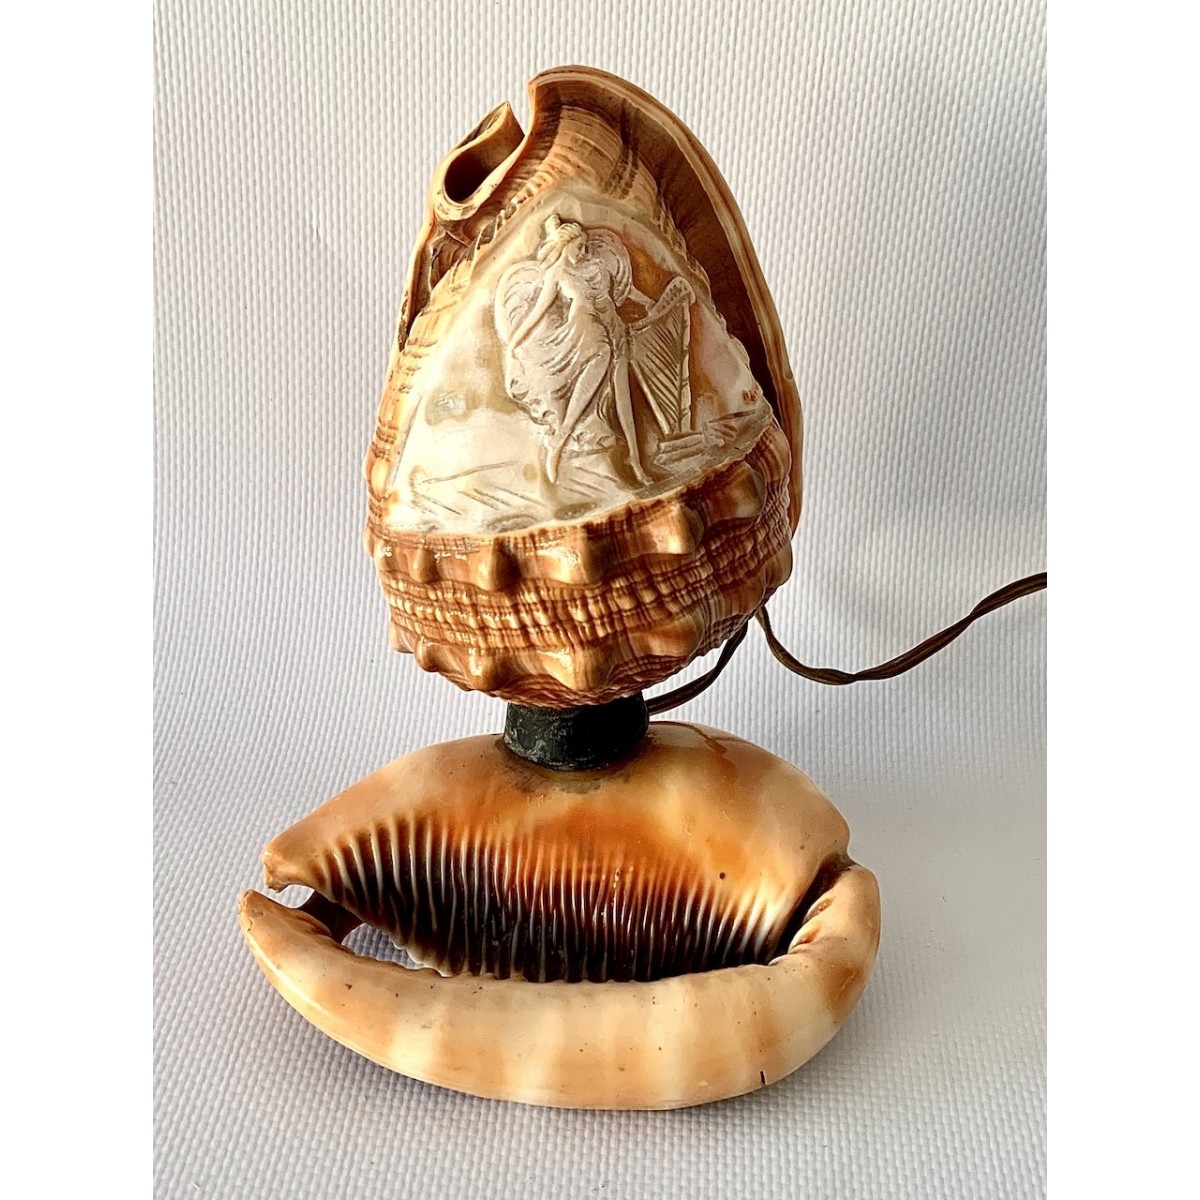 Table lamp, made with two shells cameo carved